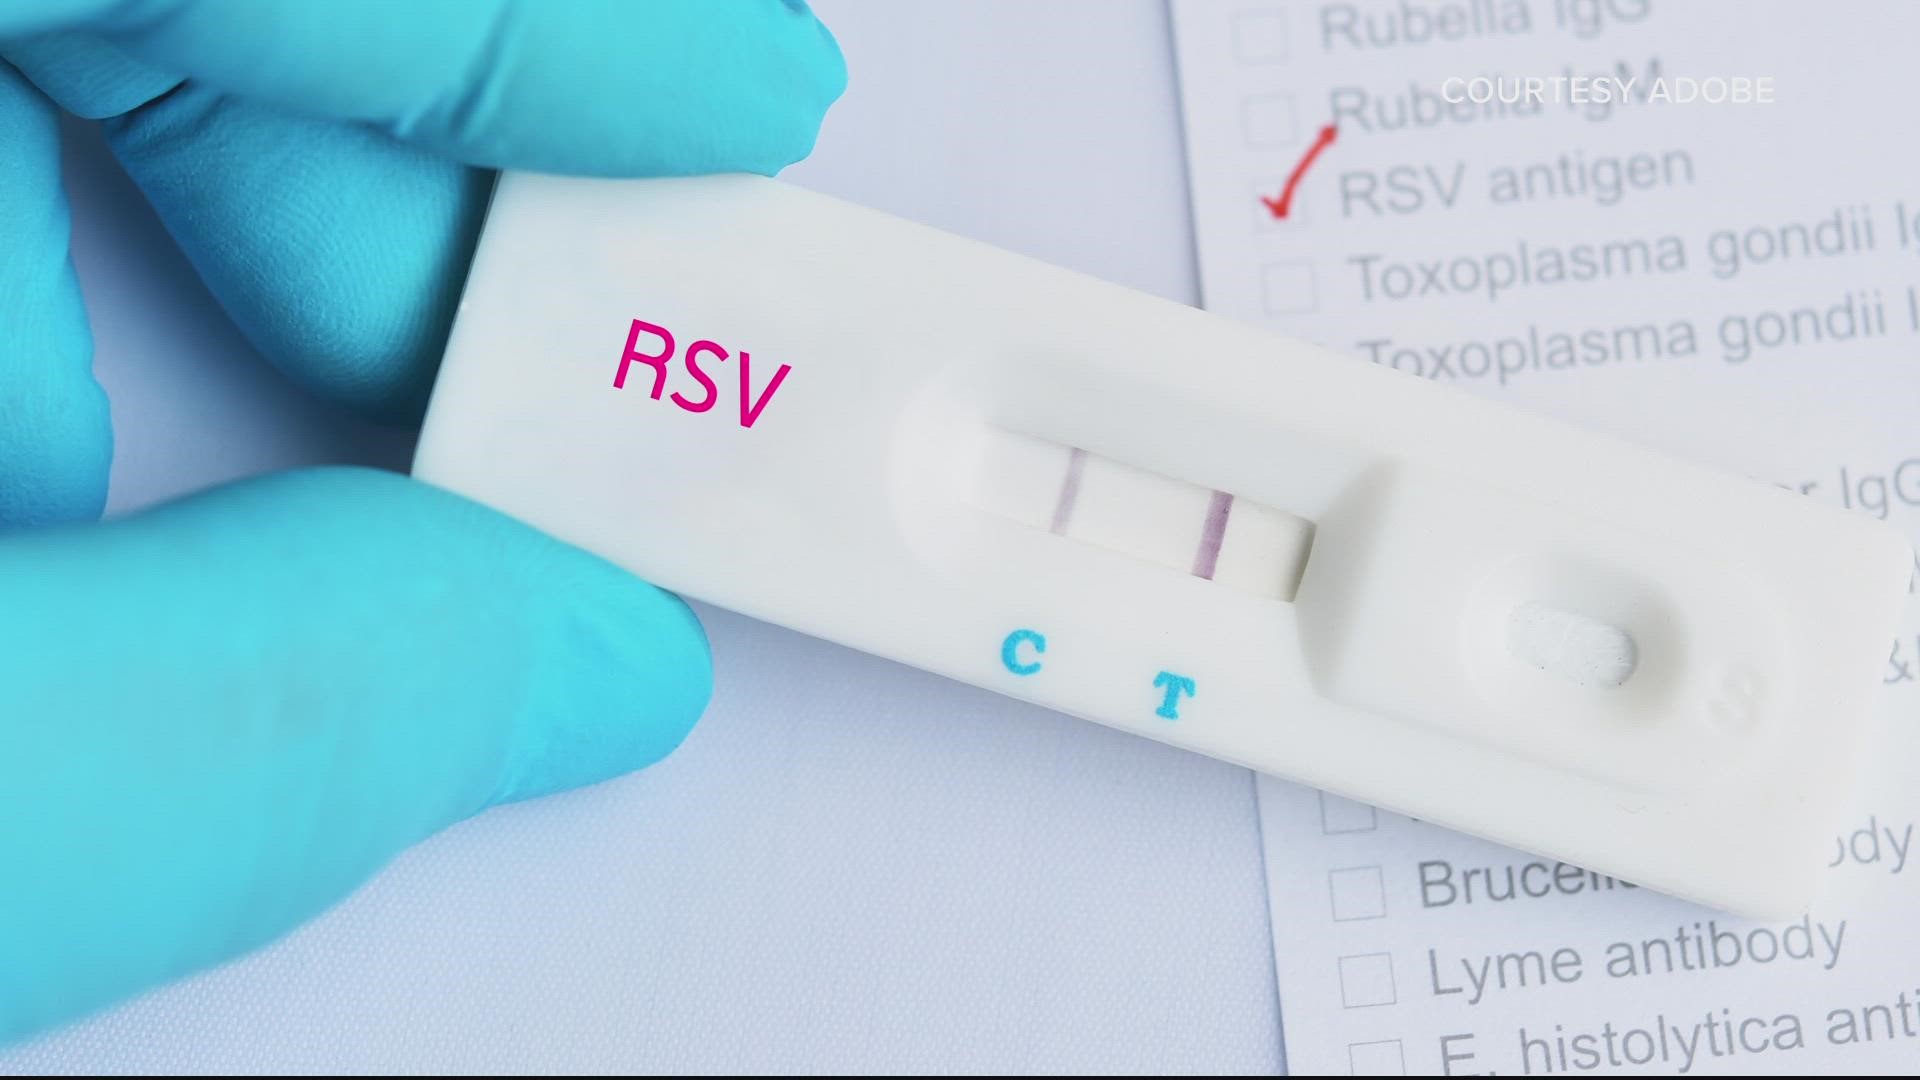 The Maryland Department of Health launched a new website with resources about RSV spreading rapidly in the state and steps people can take to protect themselves.